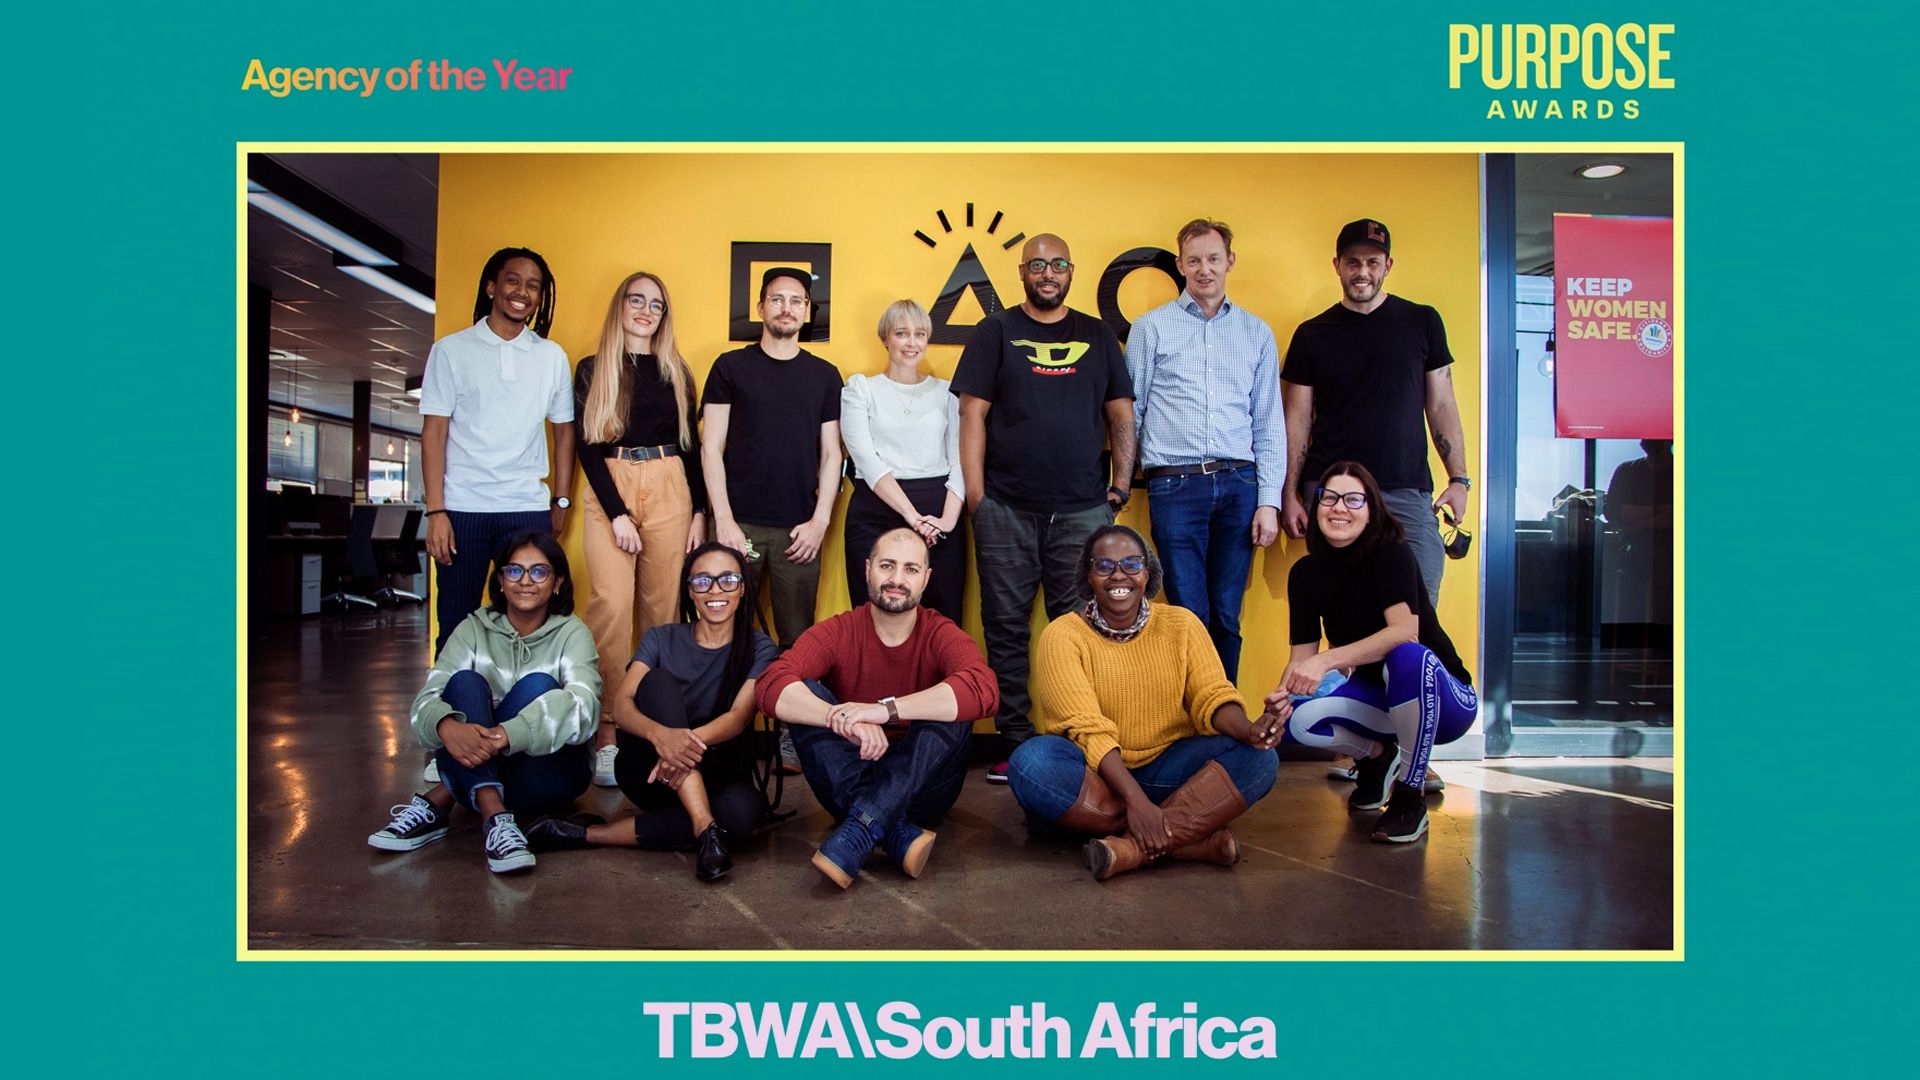 TBWA\South Africa proves having a purpose brings its own rewards